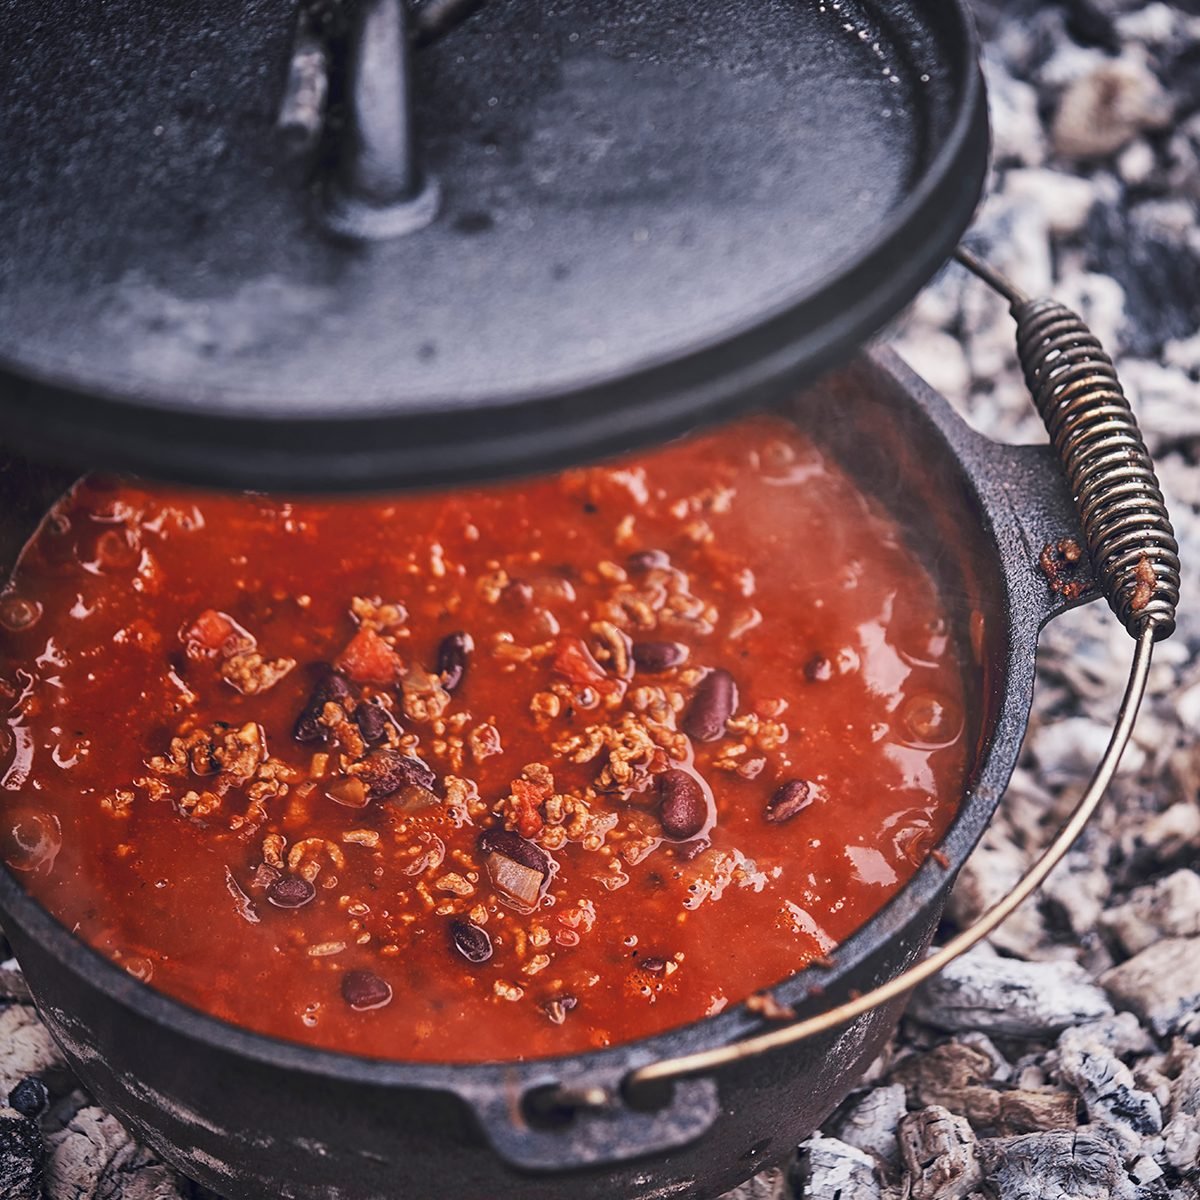 7 Easy One-Pot Meals to Simplify Your Camp Cooking